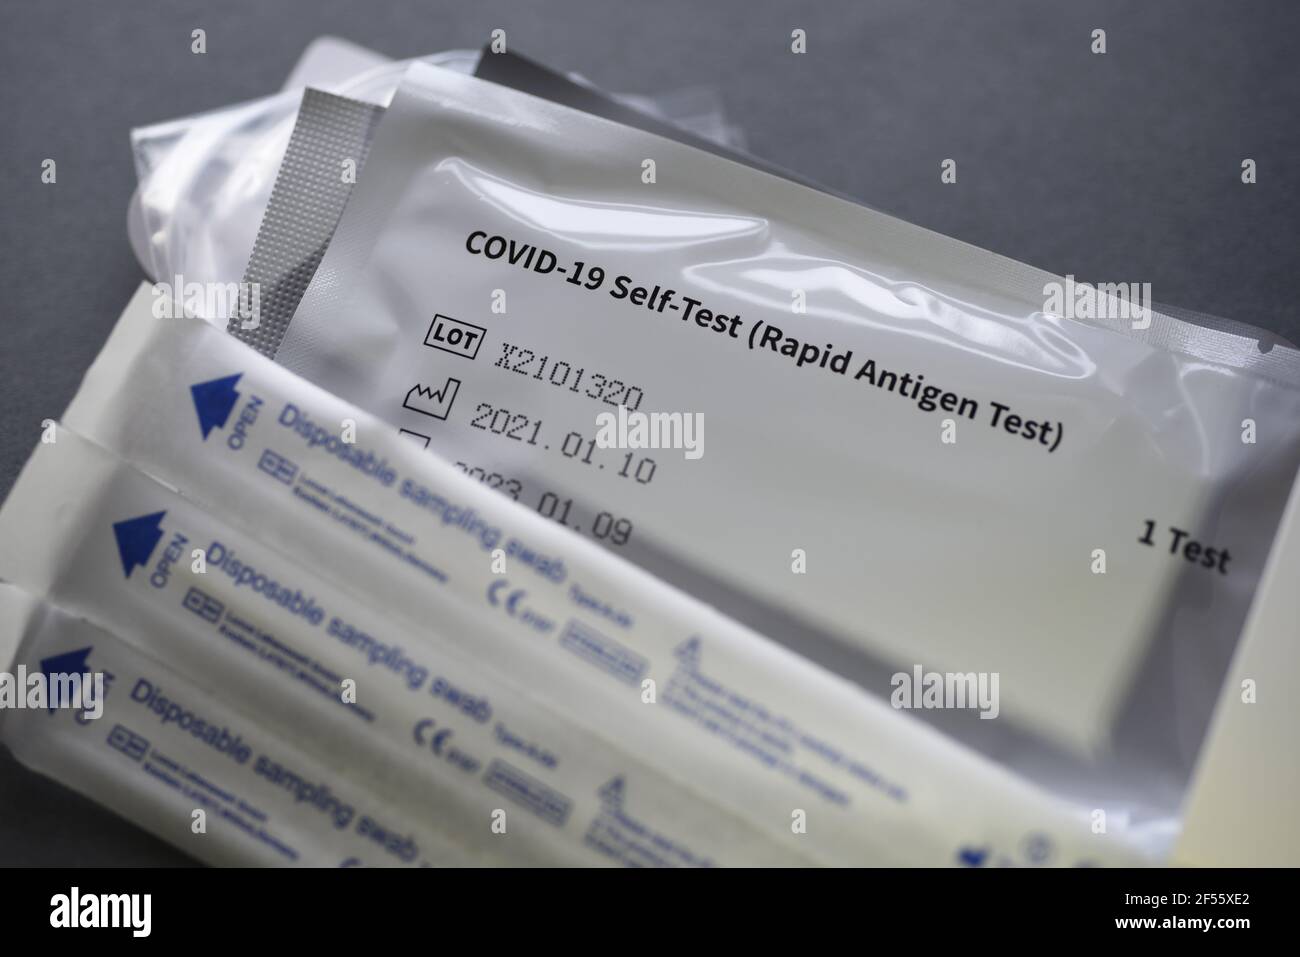 A COVID-19 Self Test (Rapid Antigen Test) kit in the UK for testing at home or in the workplace. Stock Photo